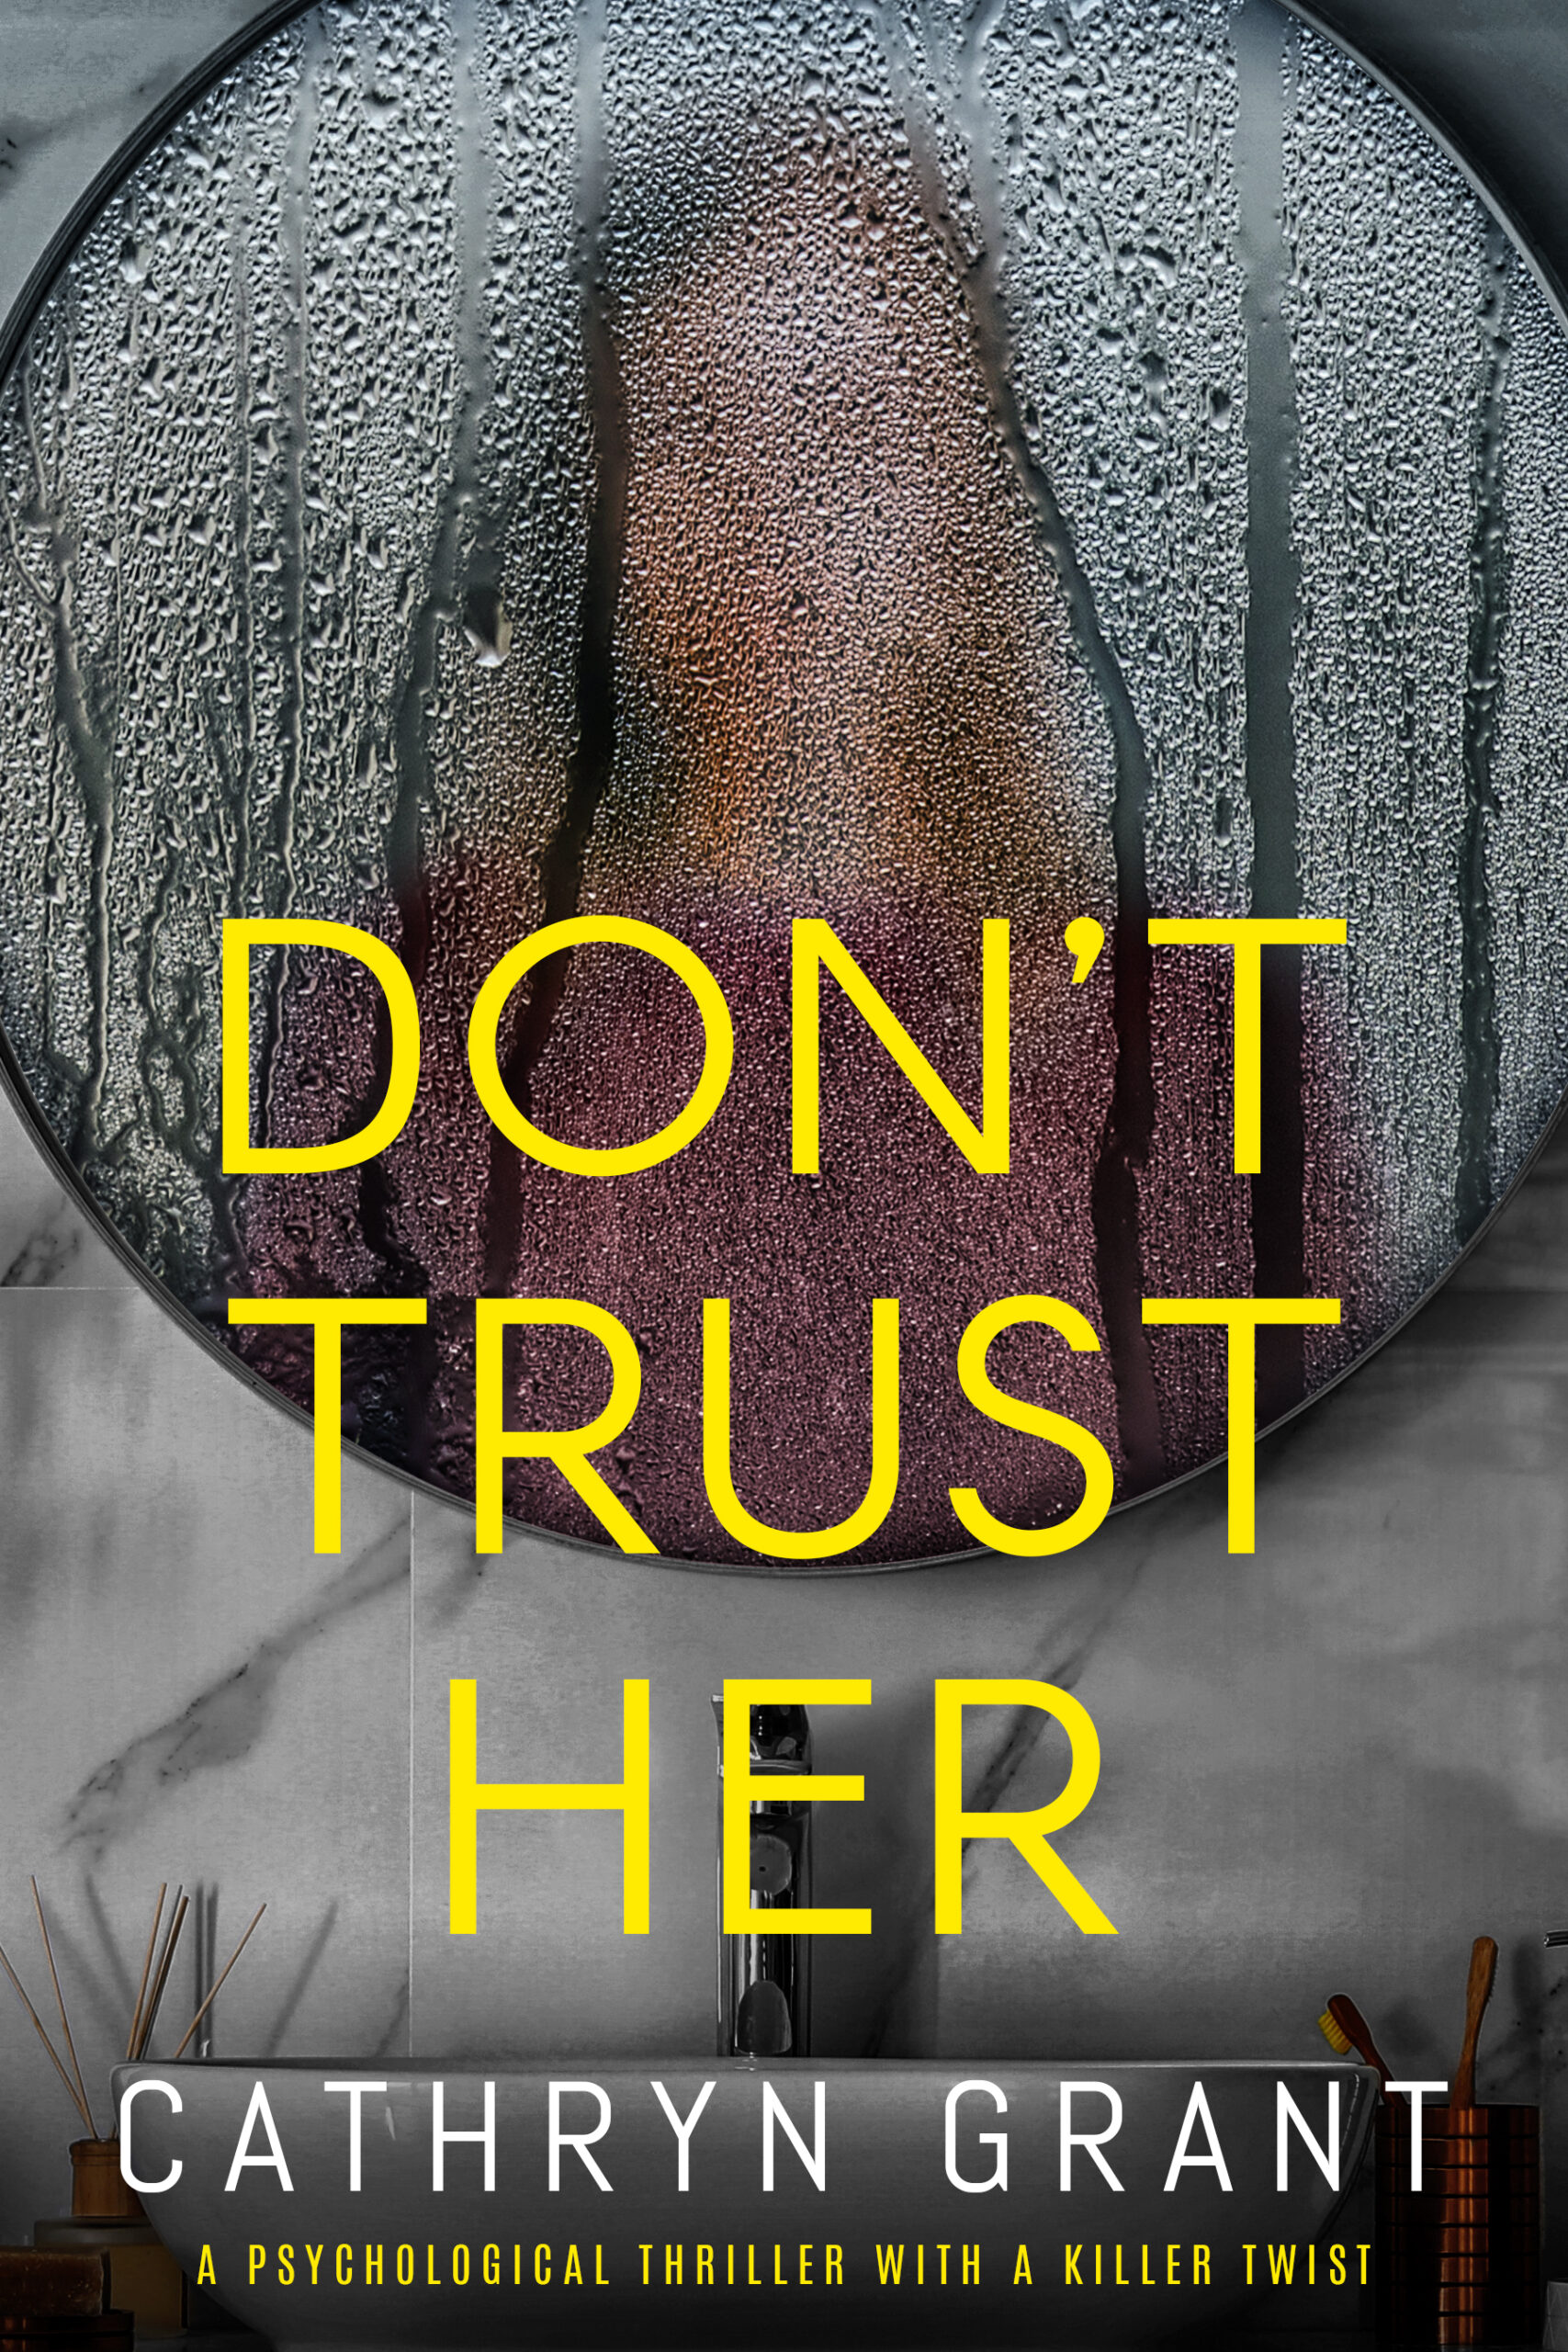 CATHRYN GRANT NEW RELEASE – DON’T TRUST HER